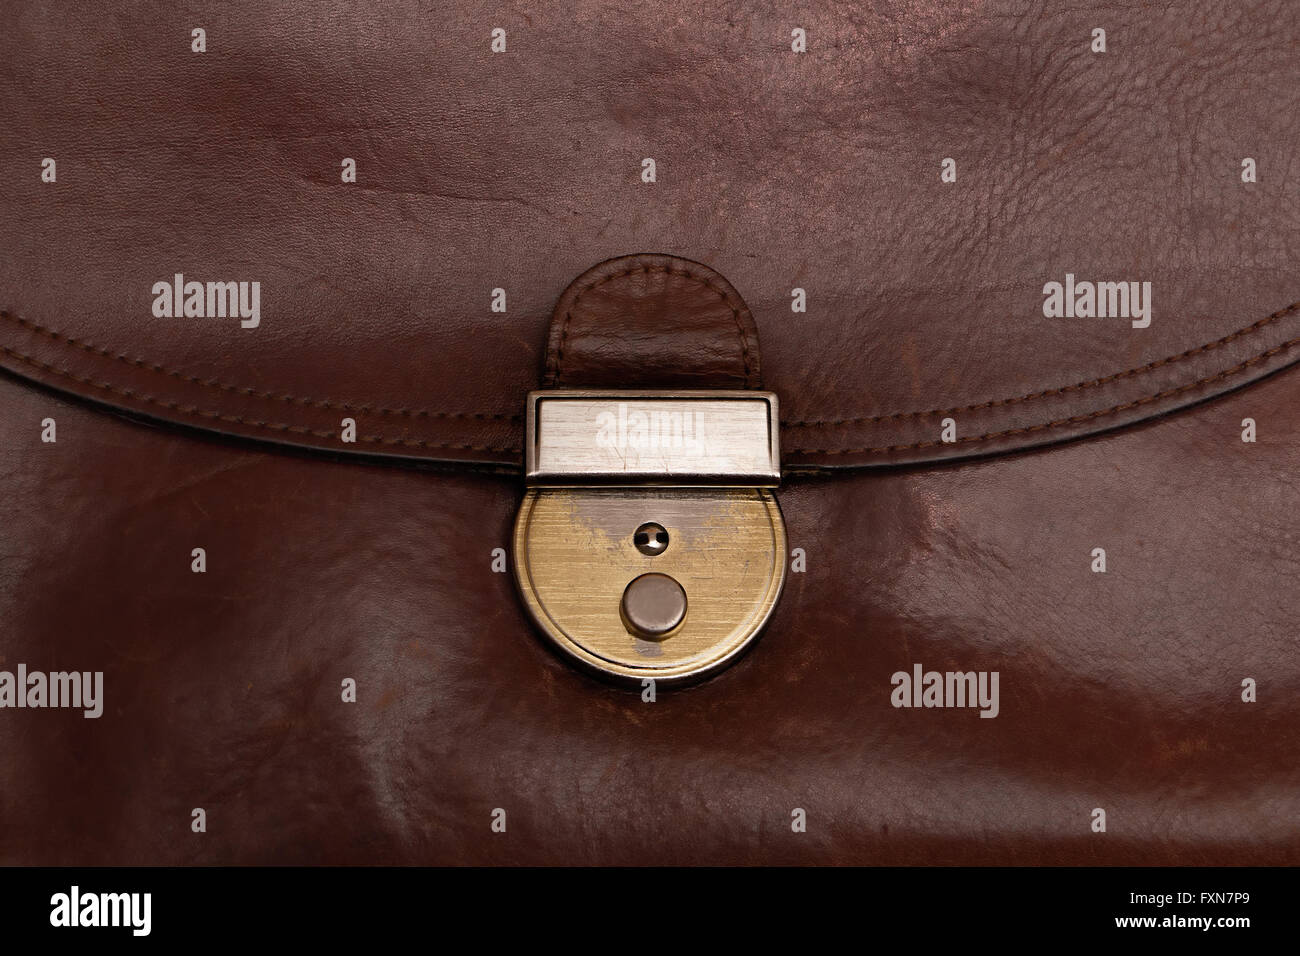 Detail of old grunge brown leather bag or briefcase Stock Photo